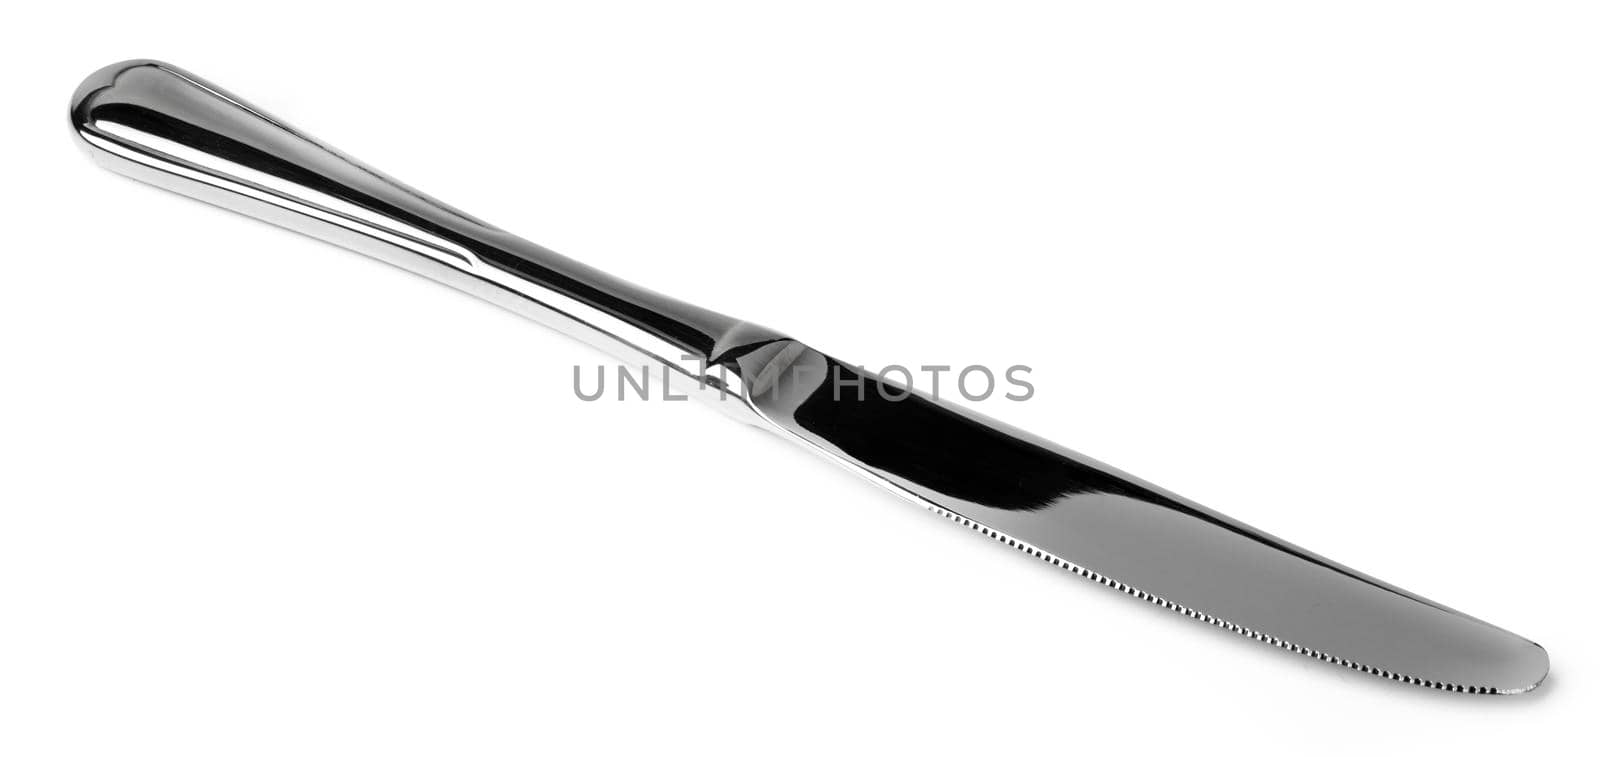 Silver dining knife isolated on white background by Fabrikasimf